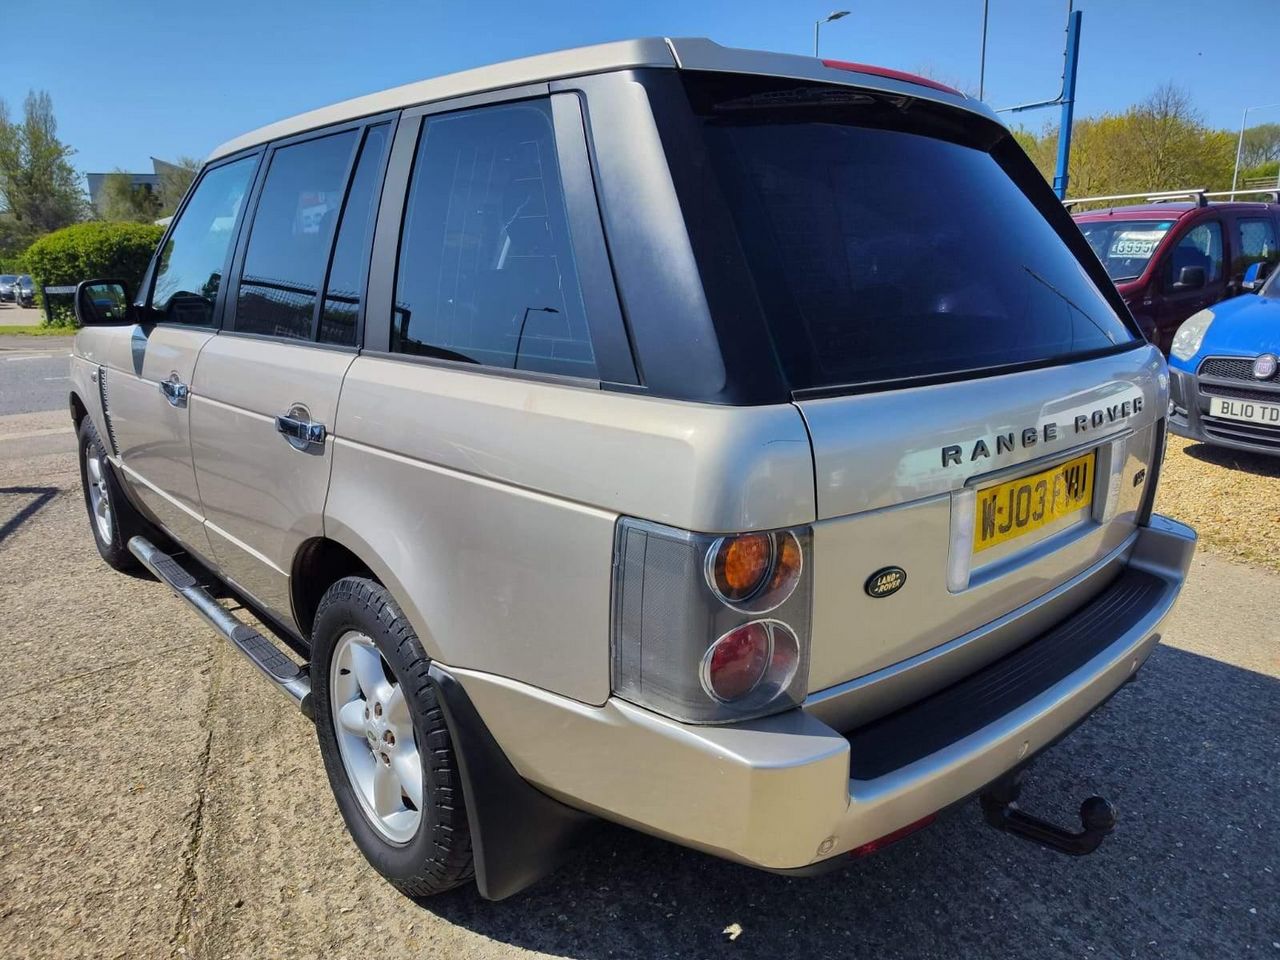 2003 Land Rover Range Rover 3.0 Td6 HSE 5dr - Picture 7 of 32